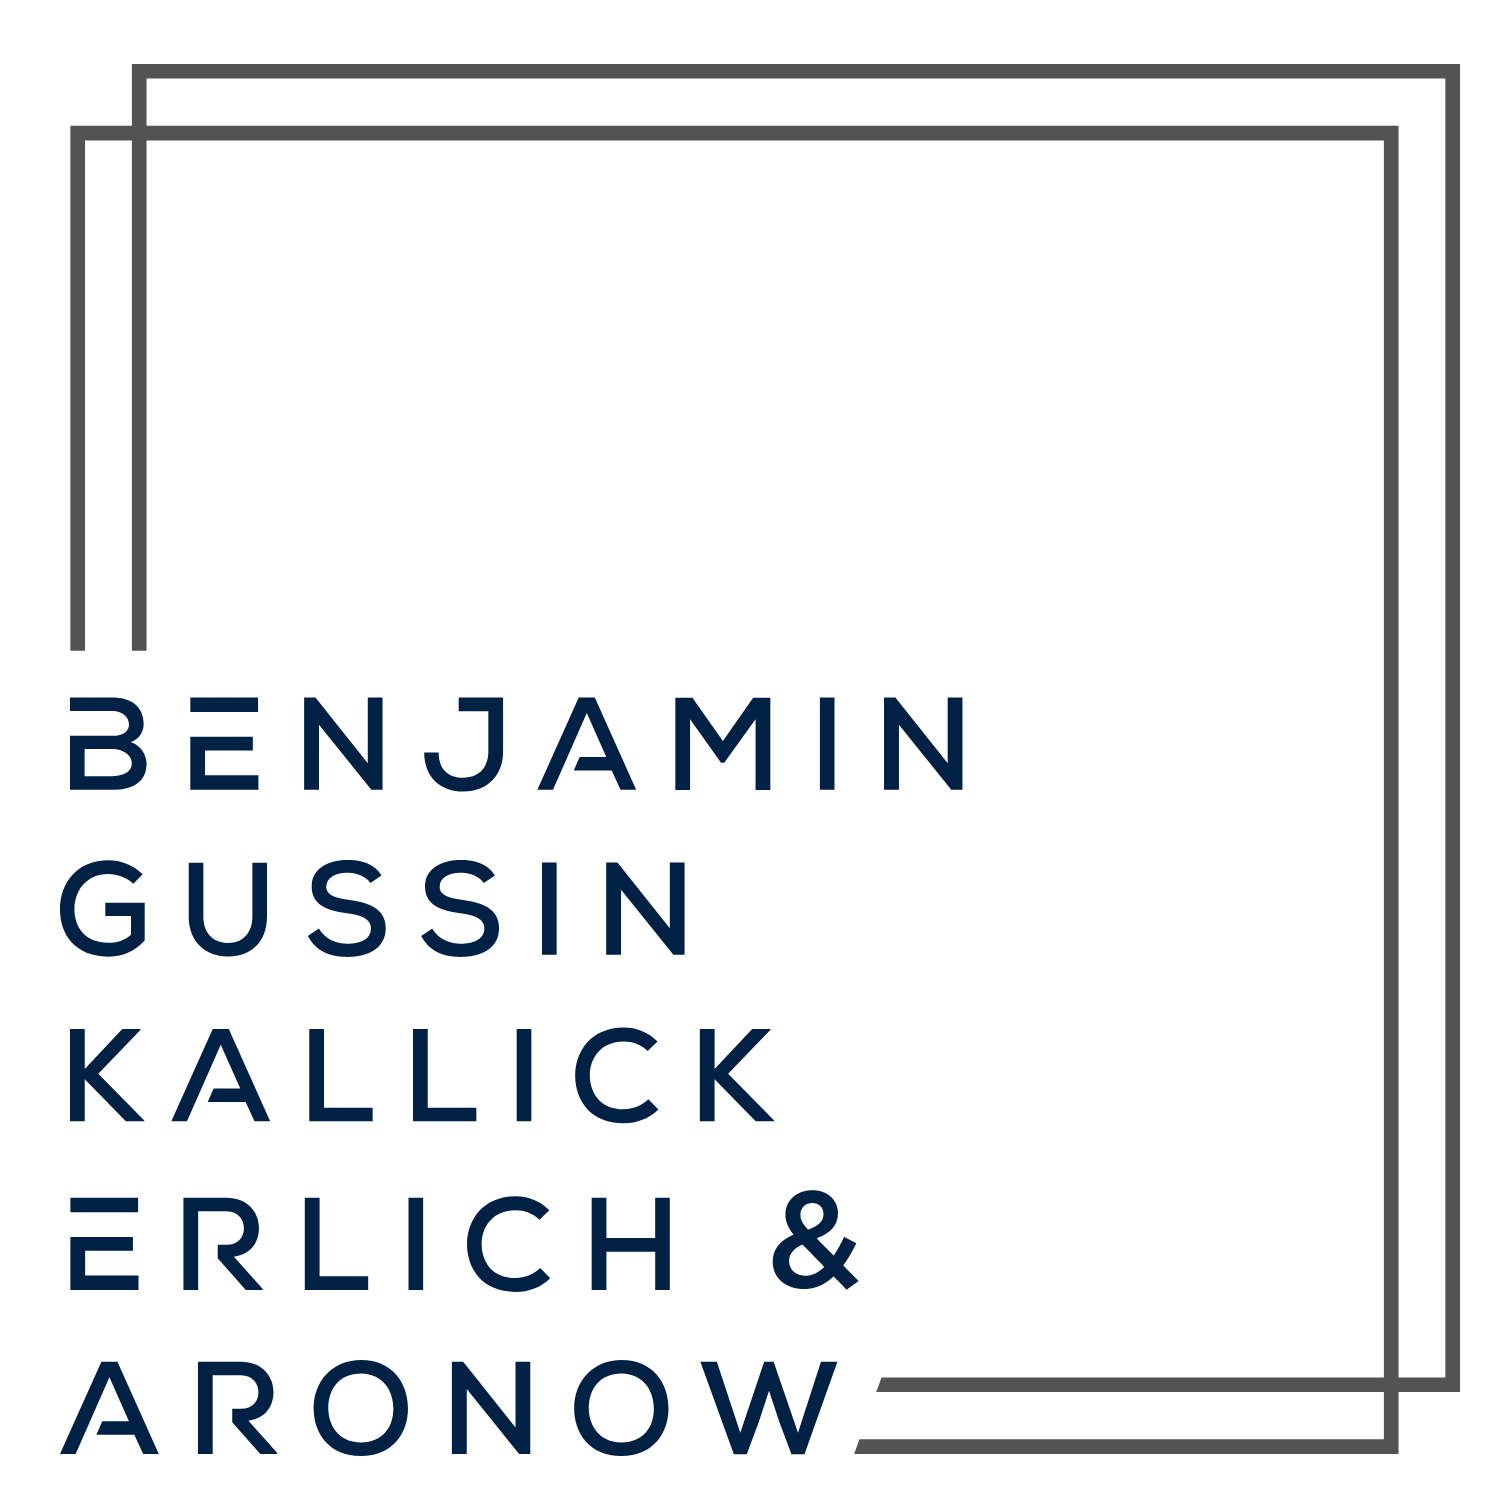 Benjamin, Gussin, Kallick, Erlich & Aronow | Helping Our Clients Put the Pieces Together